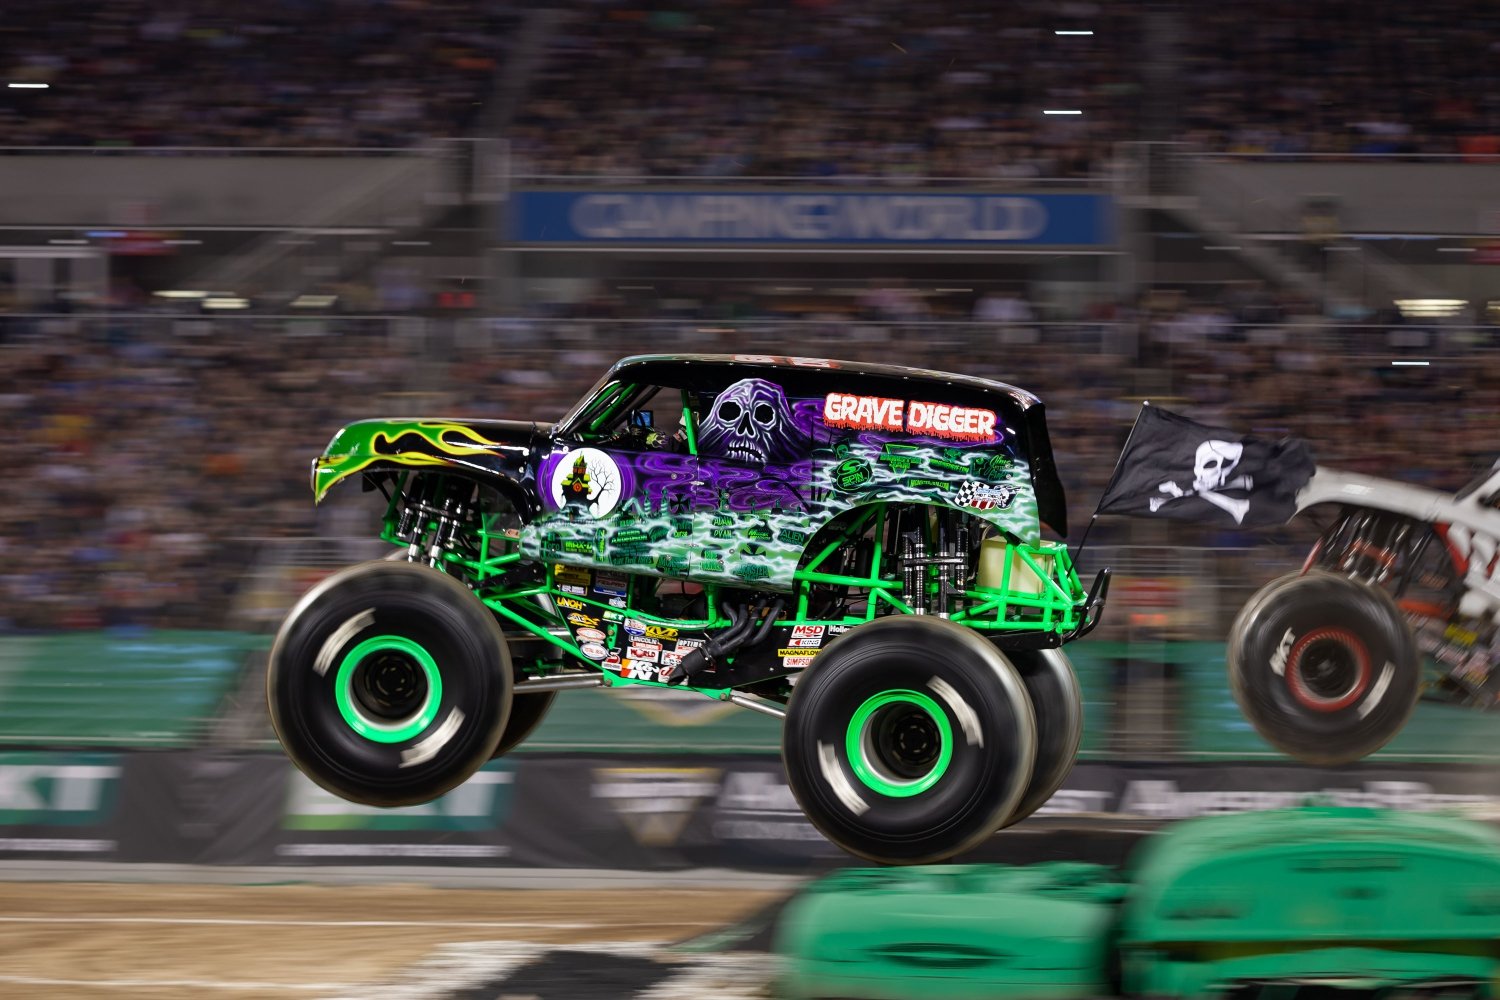 Monster Jam returns to Melbourne with fun for the whole family – tickets on-sale today!